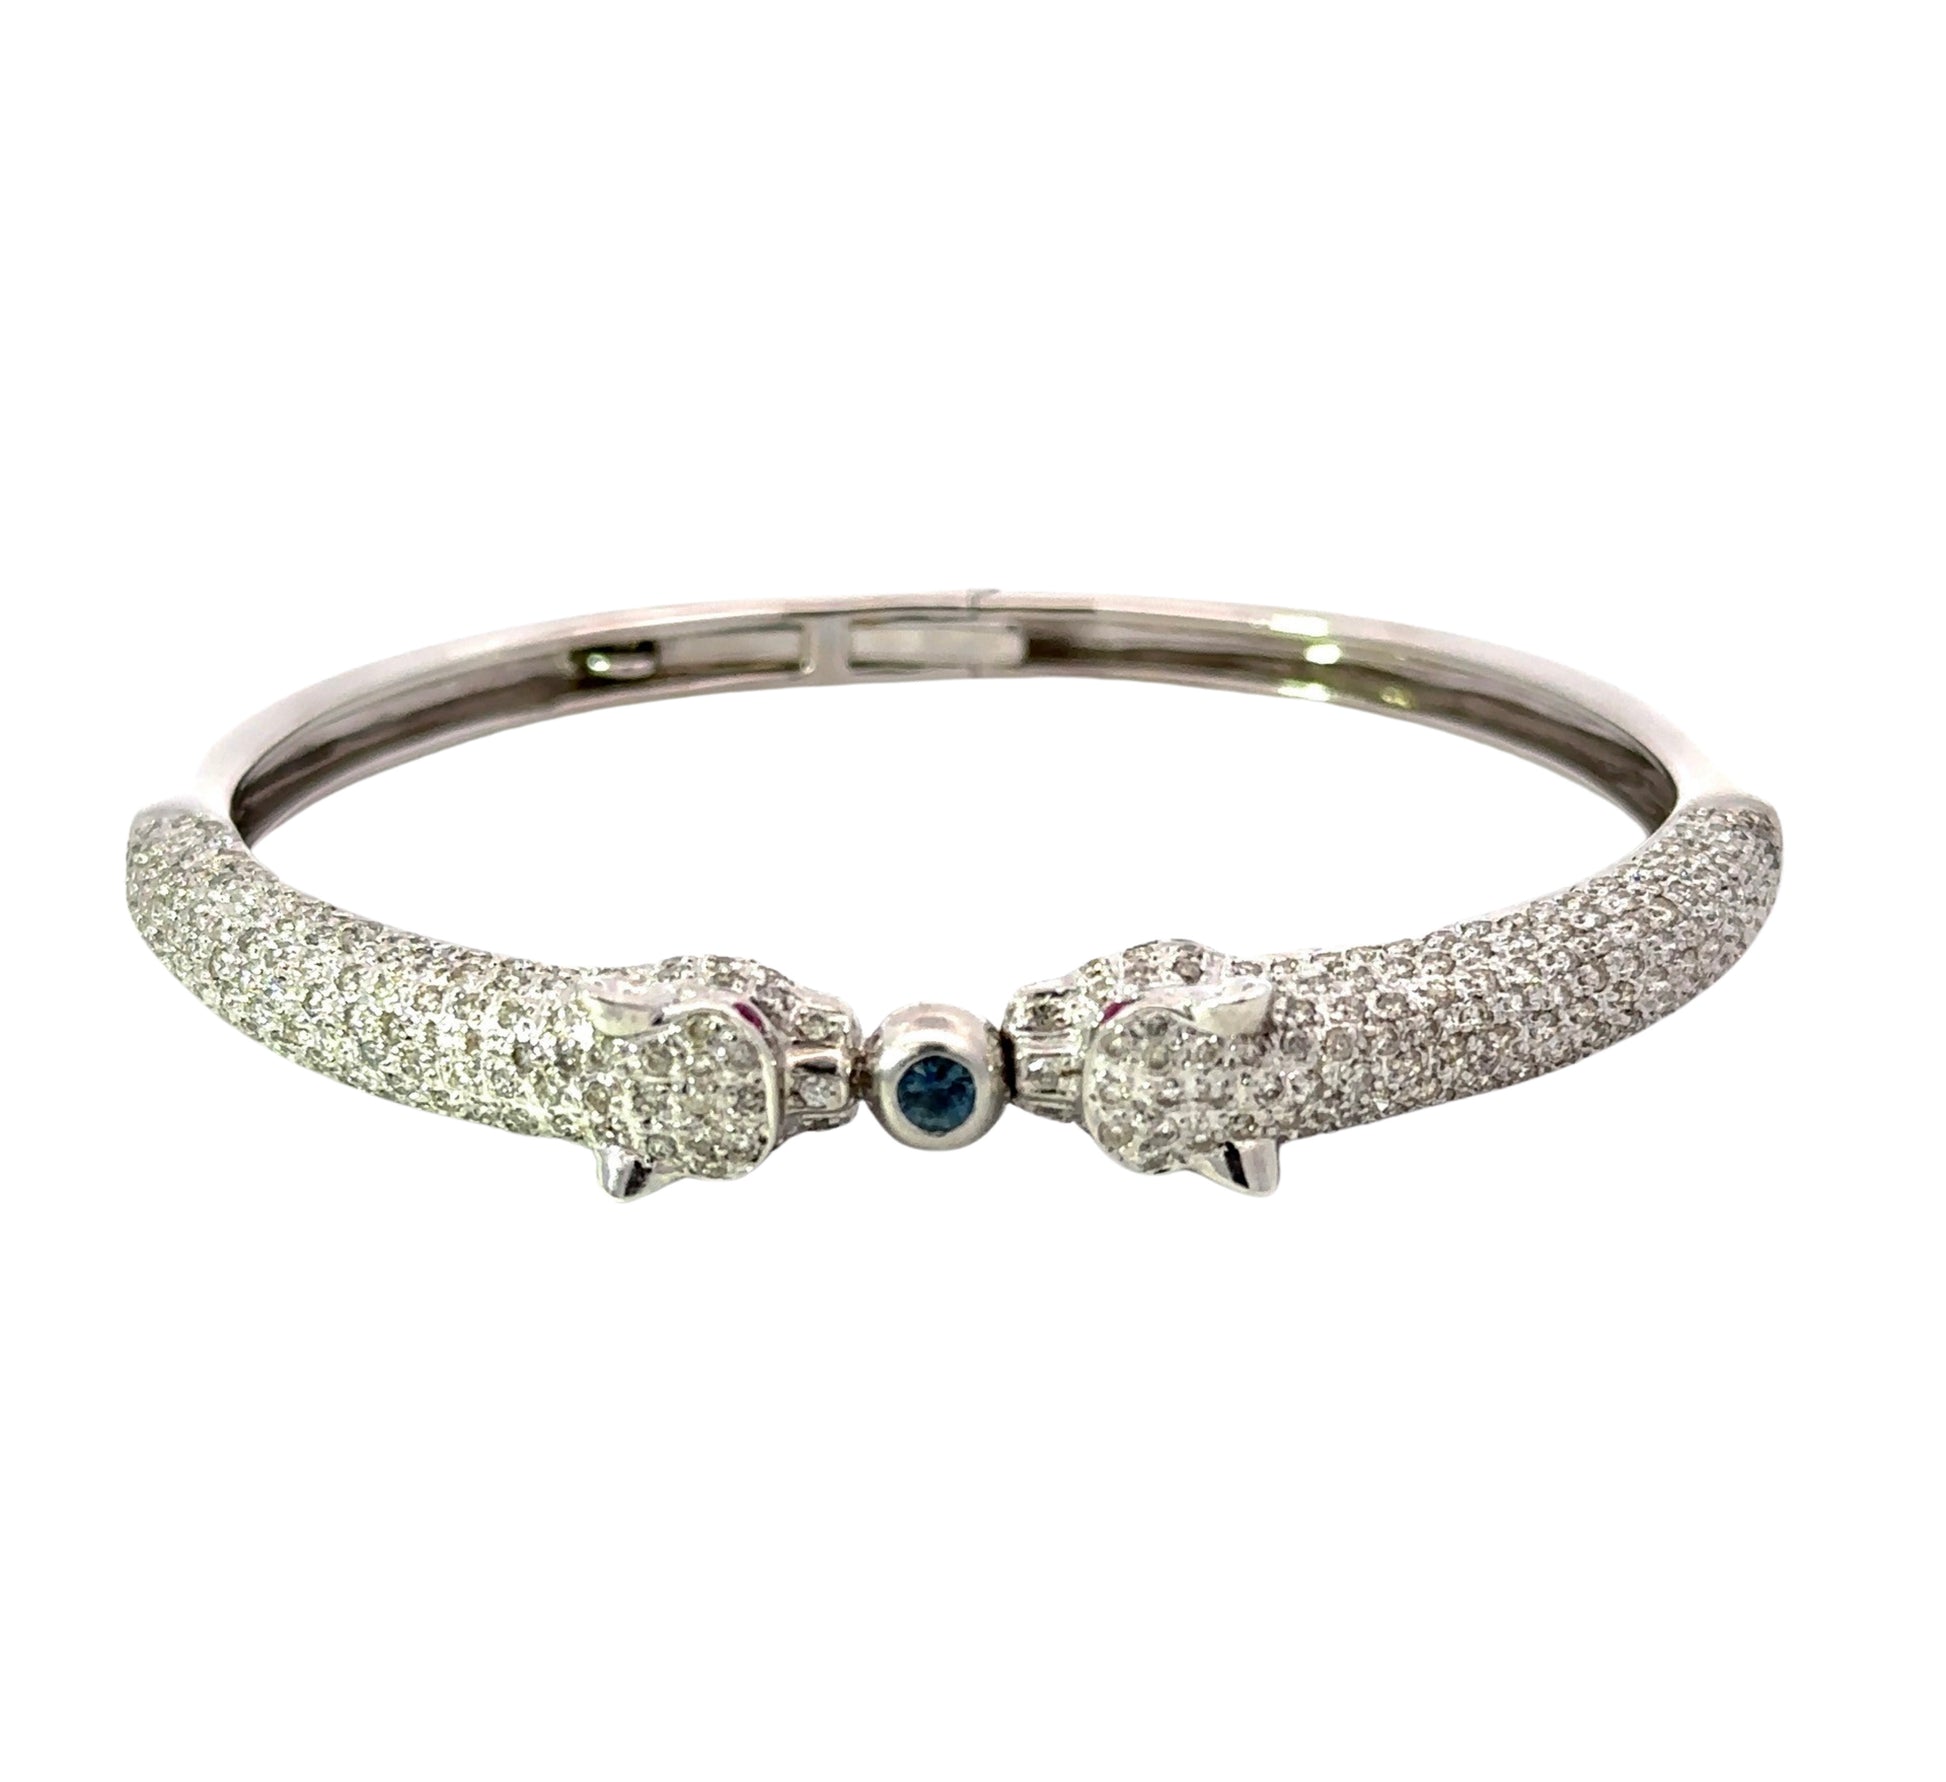 Top view of white gold bangle with diamond panthers and 1 blue gemstone for the lock